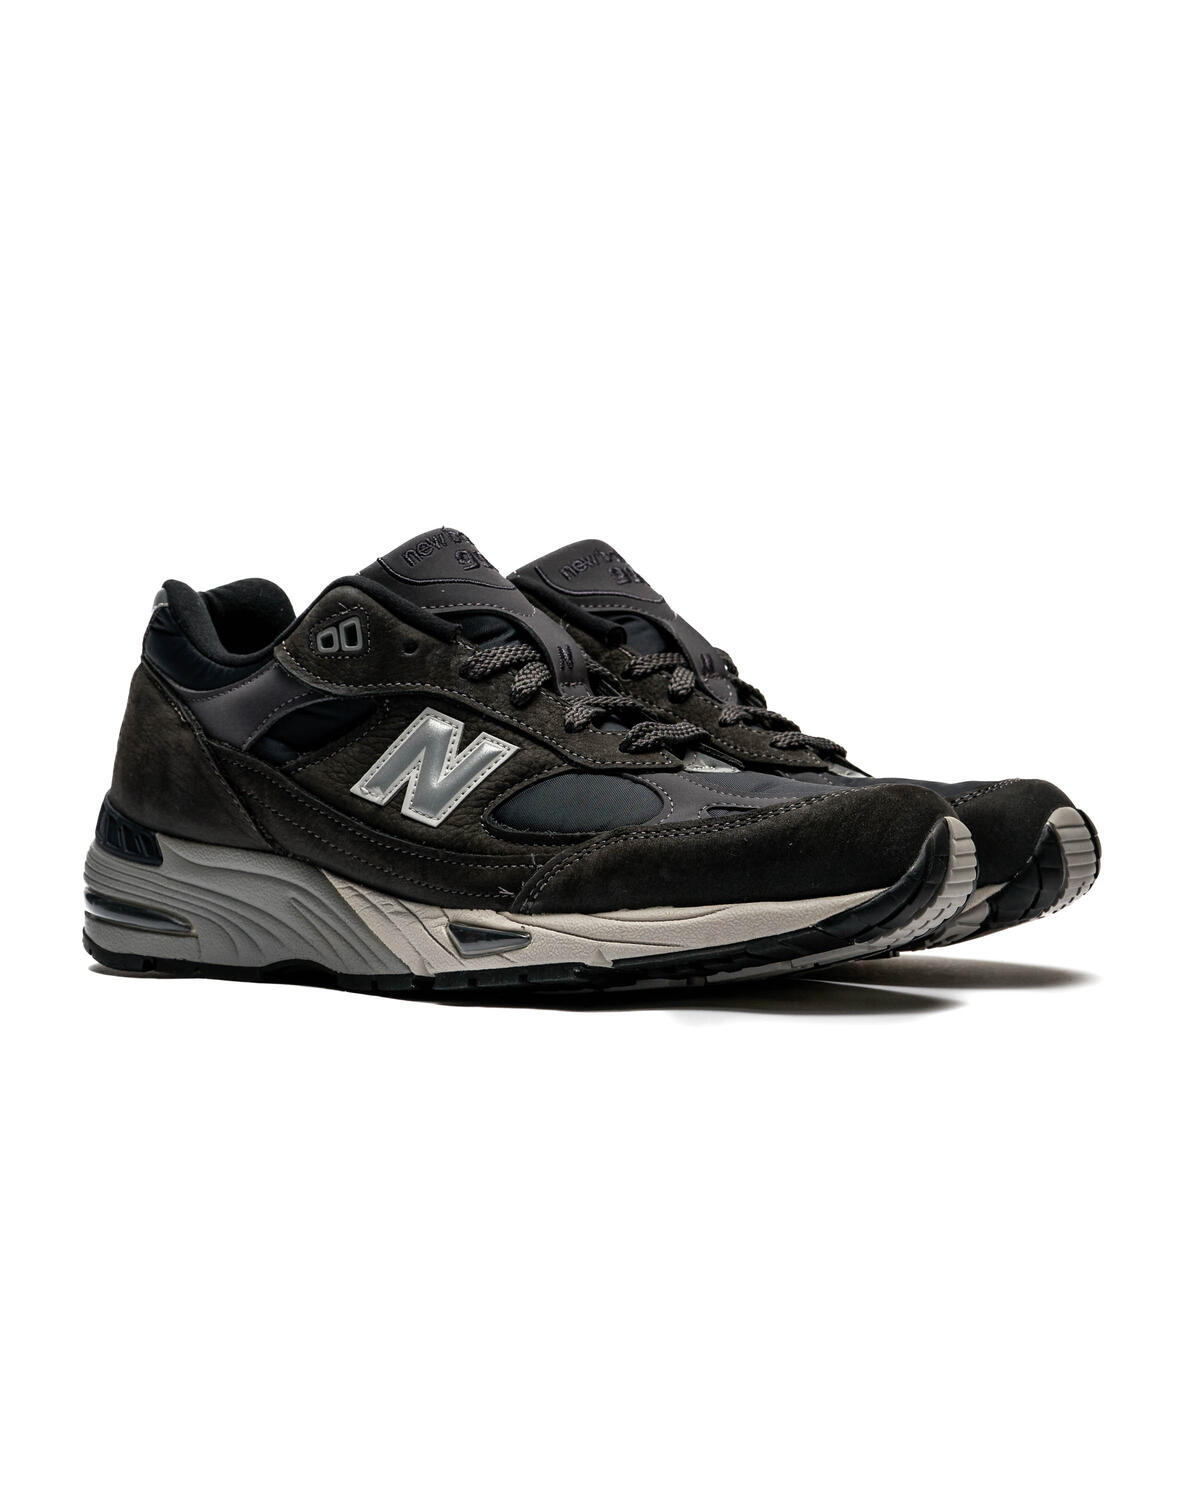 New Balance M 991 DGG - Made in England | M991DGG | AFEW STORE